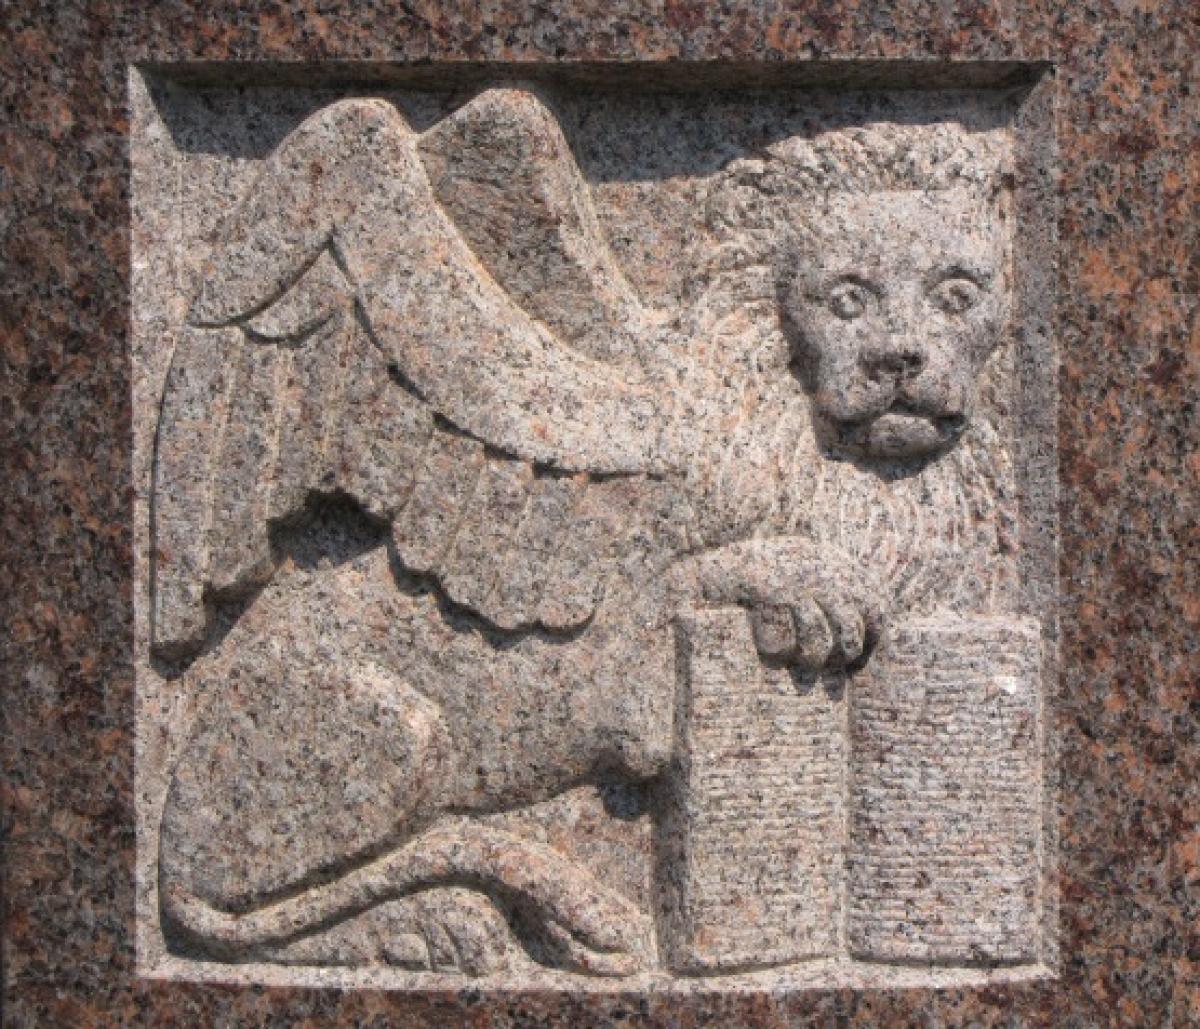 OK, Grove, Headstone Symbols and Meanings, Winged Lion (Saint Mark)